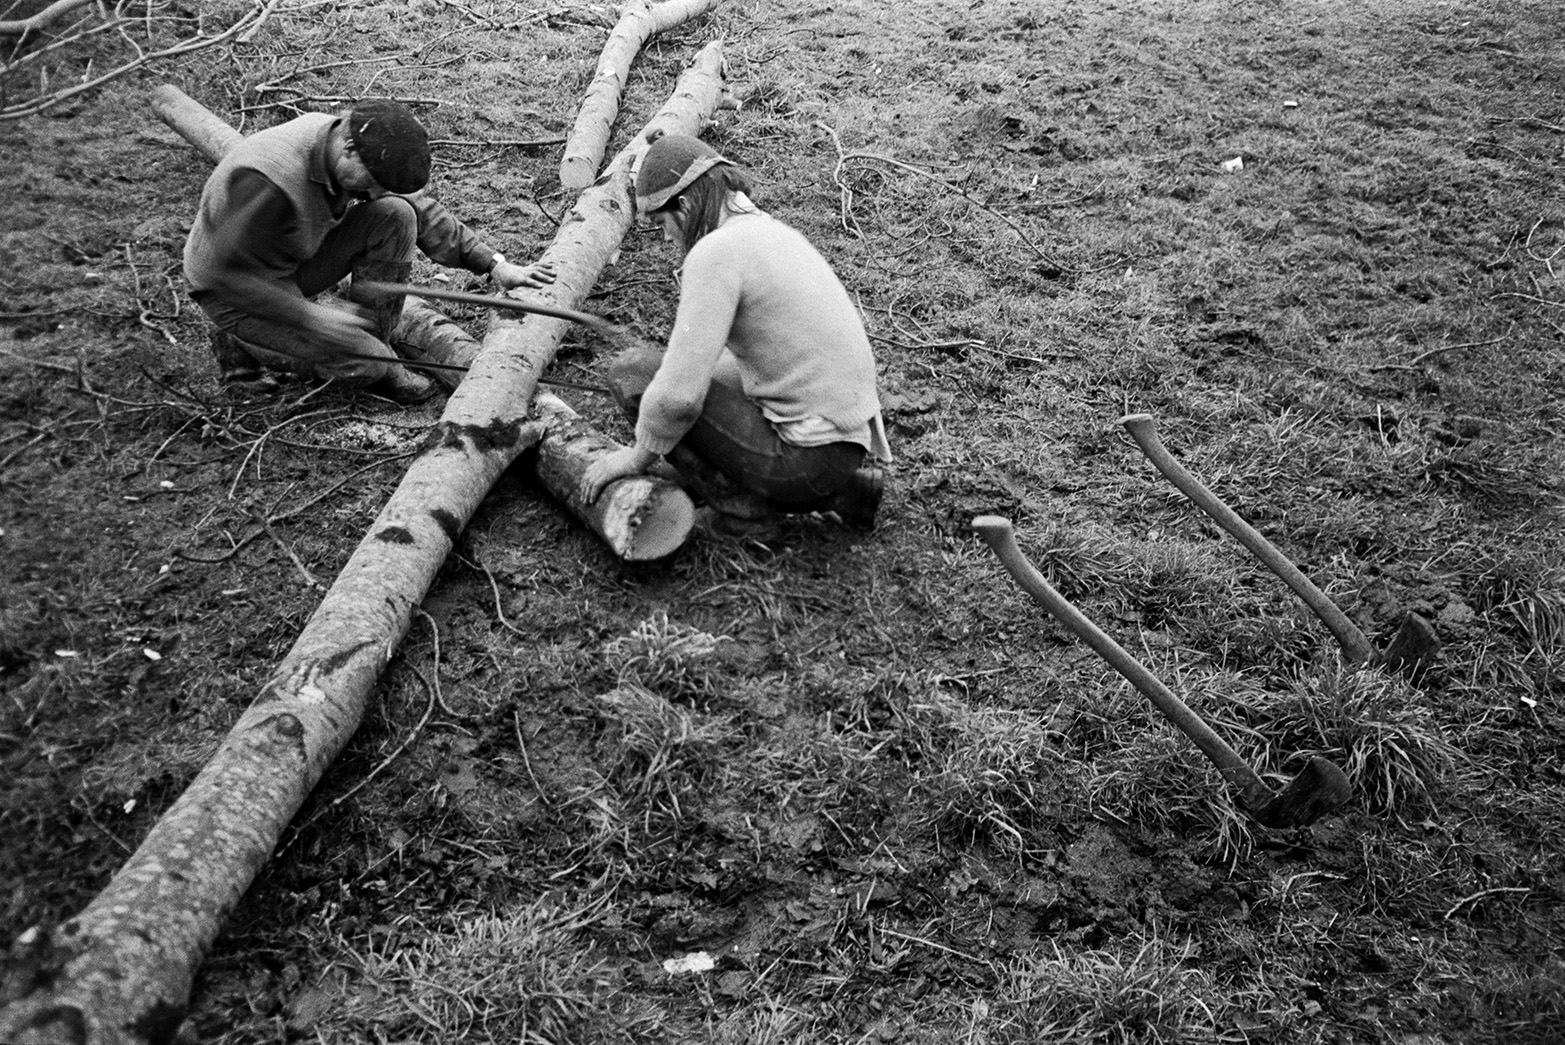 Derek Bright and Ivor Bourne sawing up a tree trunk in a field at Mill Road Farm, Beaford. Two axes are on the grass behind them. The farm was also known as Jeffrys.